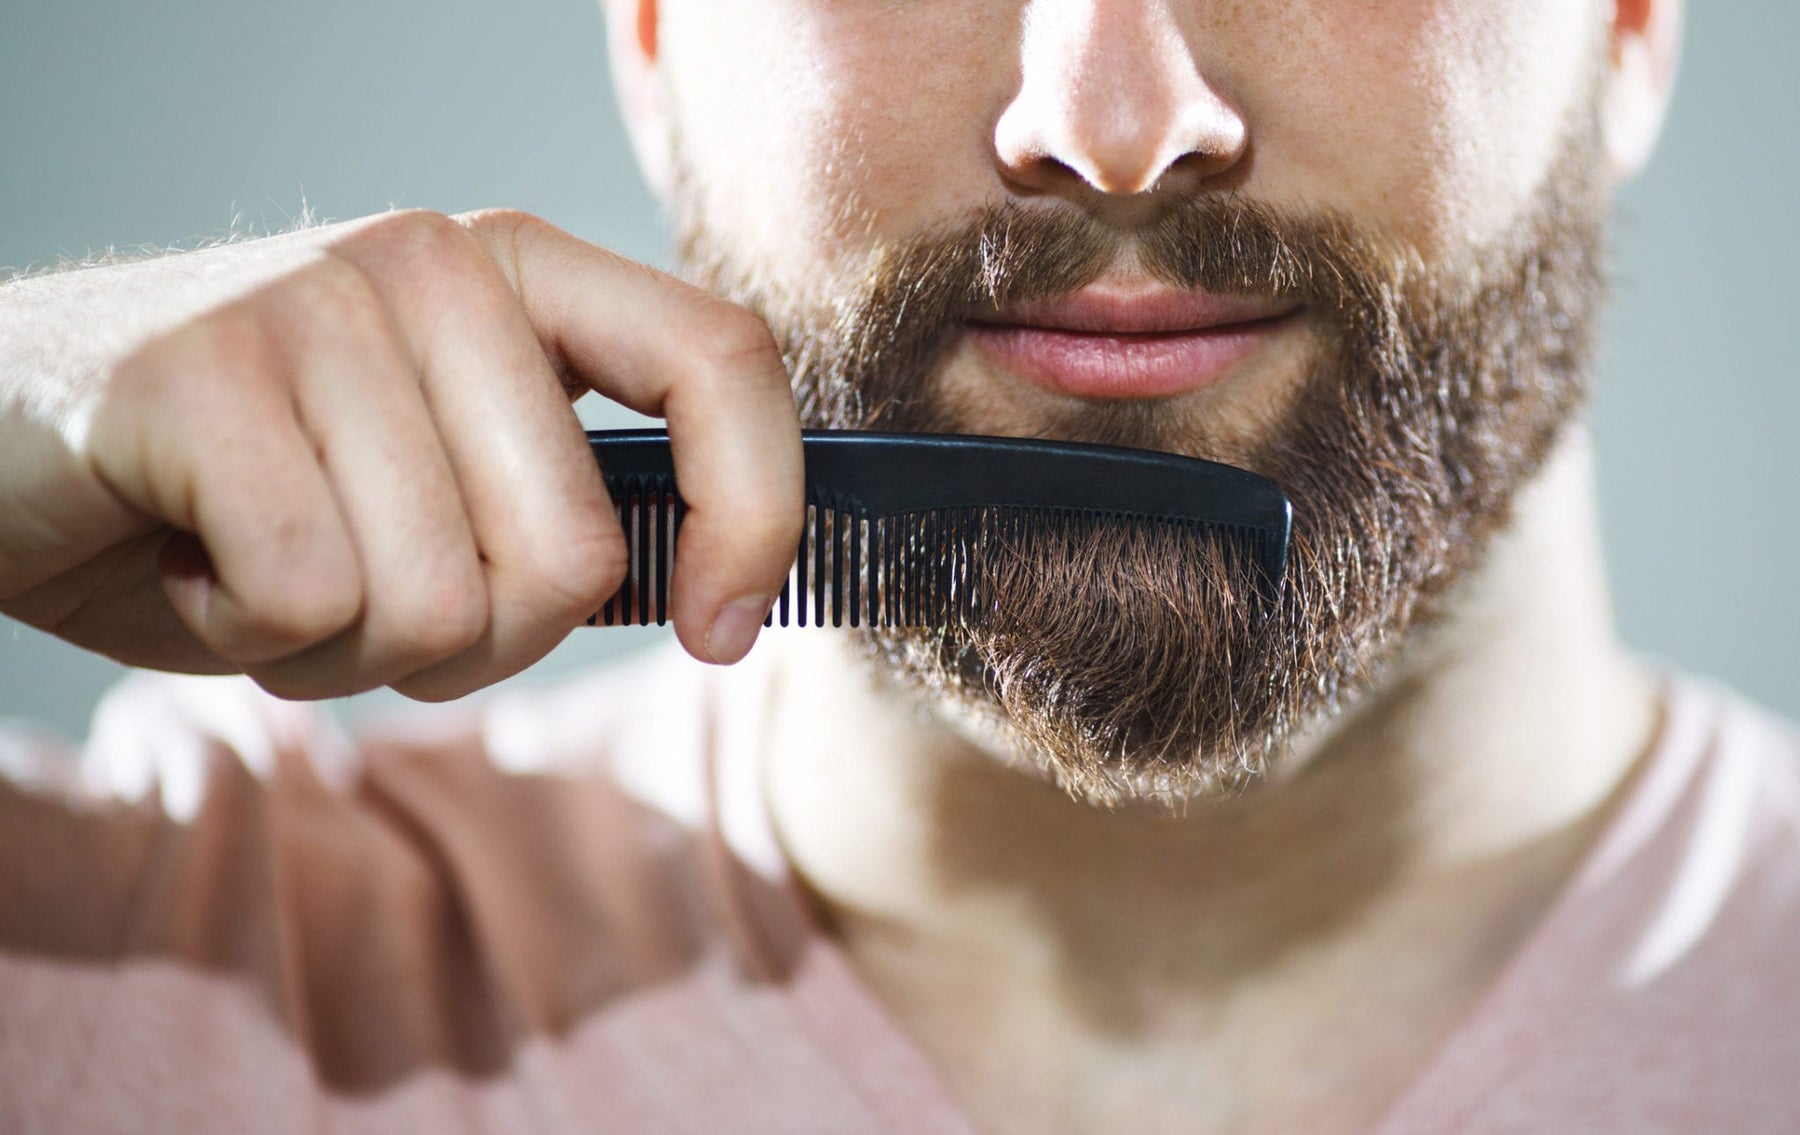 Tame that Mane: How to Shape & Style Your Beard